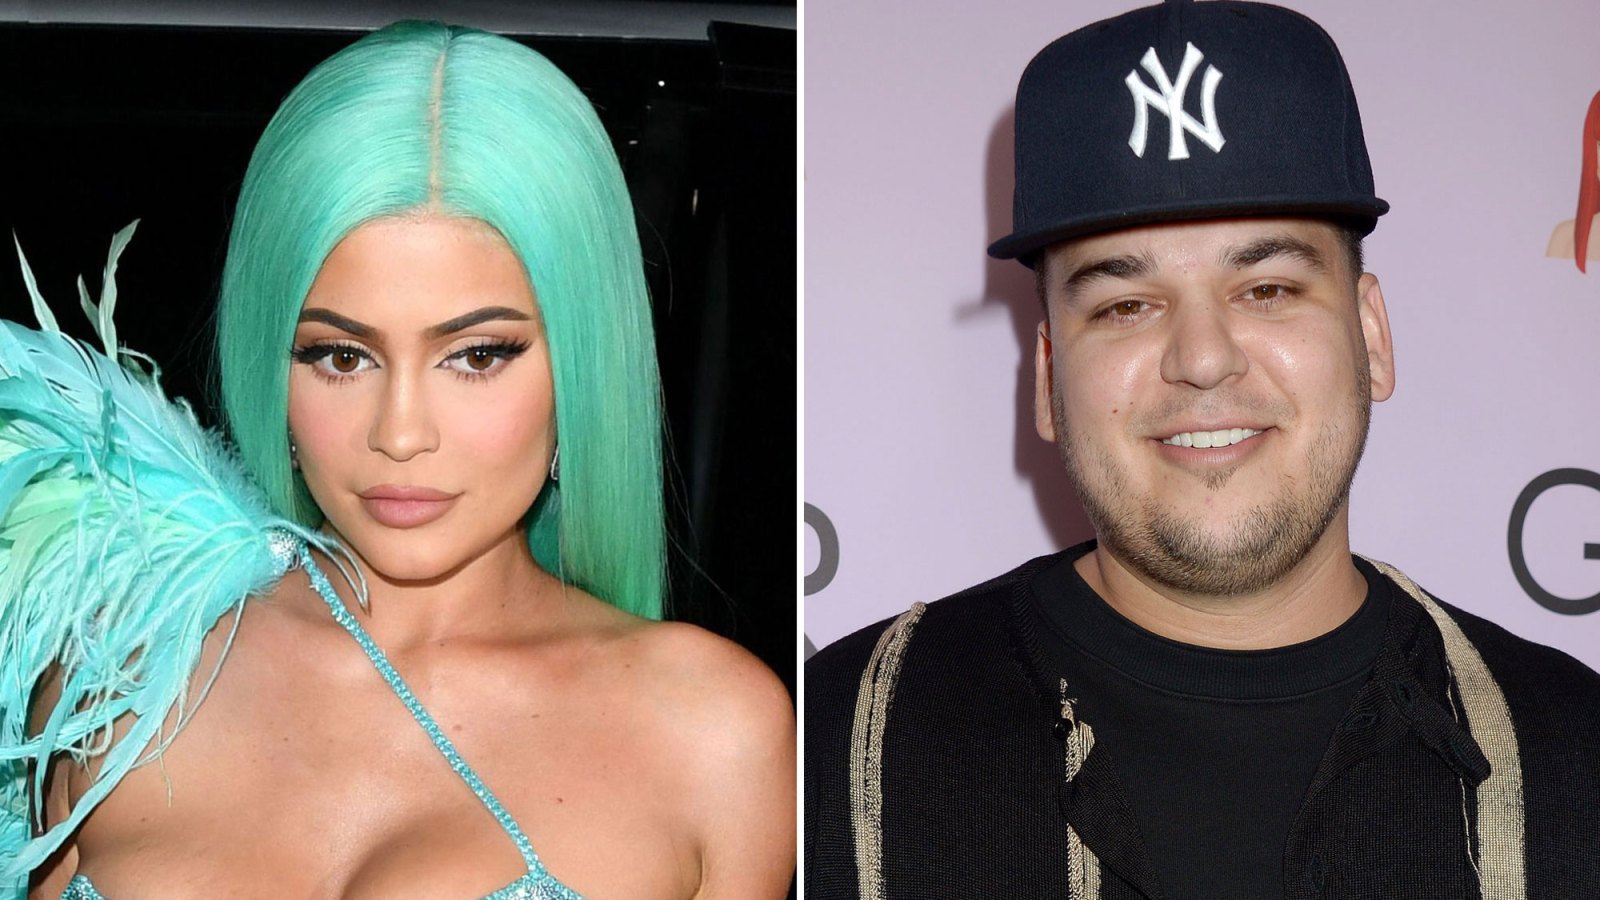 Kylie Jenner Recreates Viral 'Rise and Shine' Moment For Brother Rob Kardashian